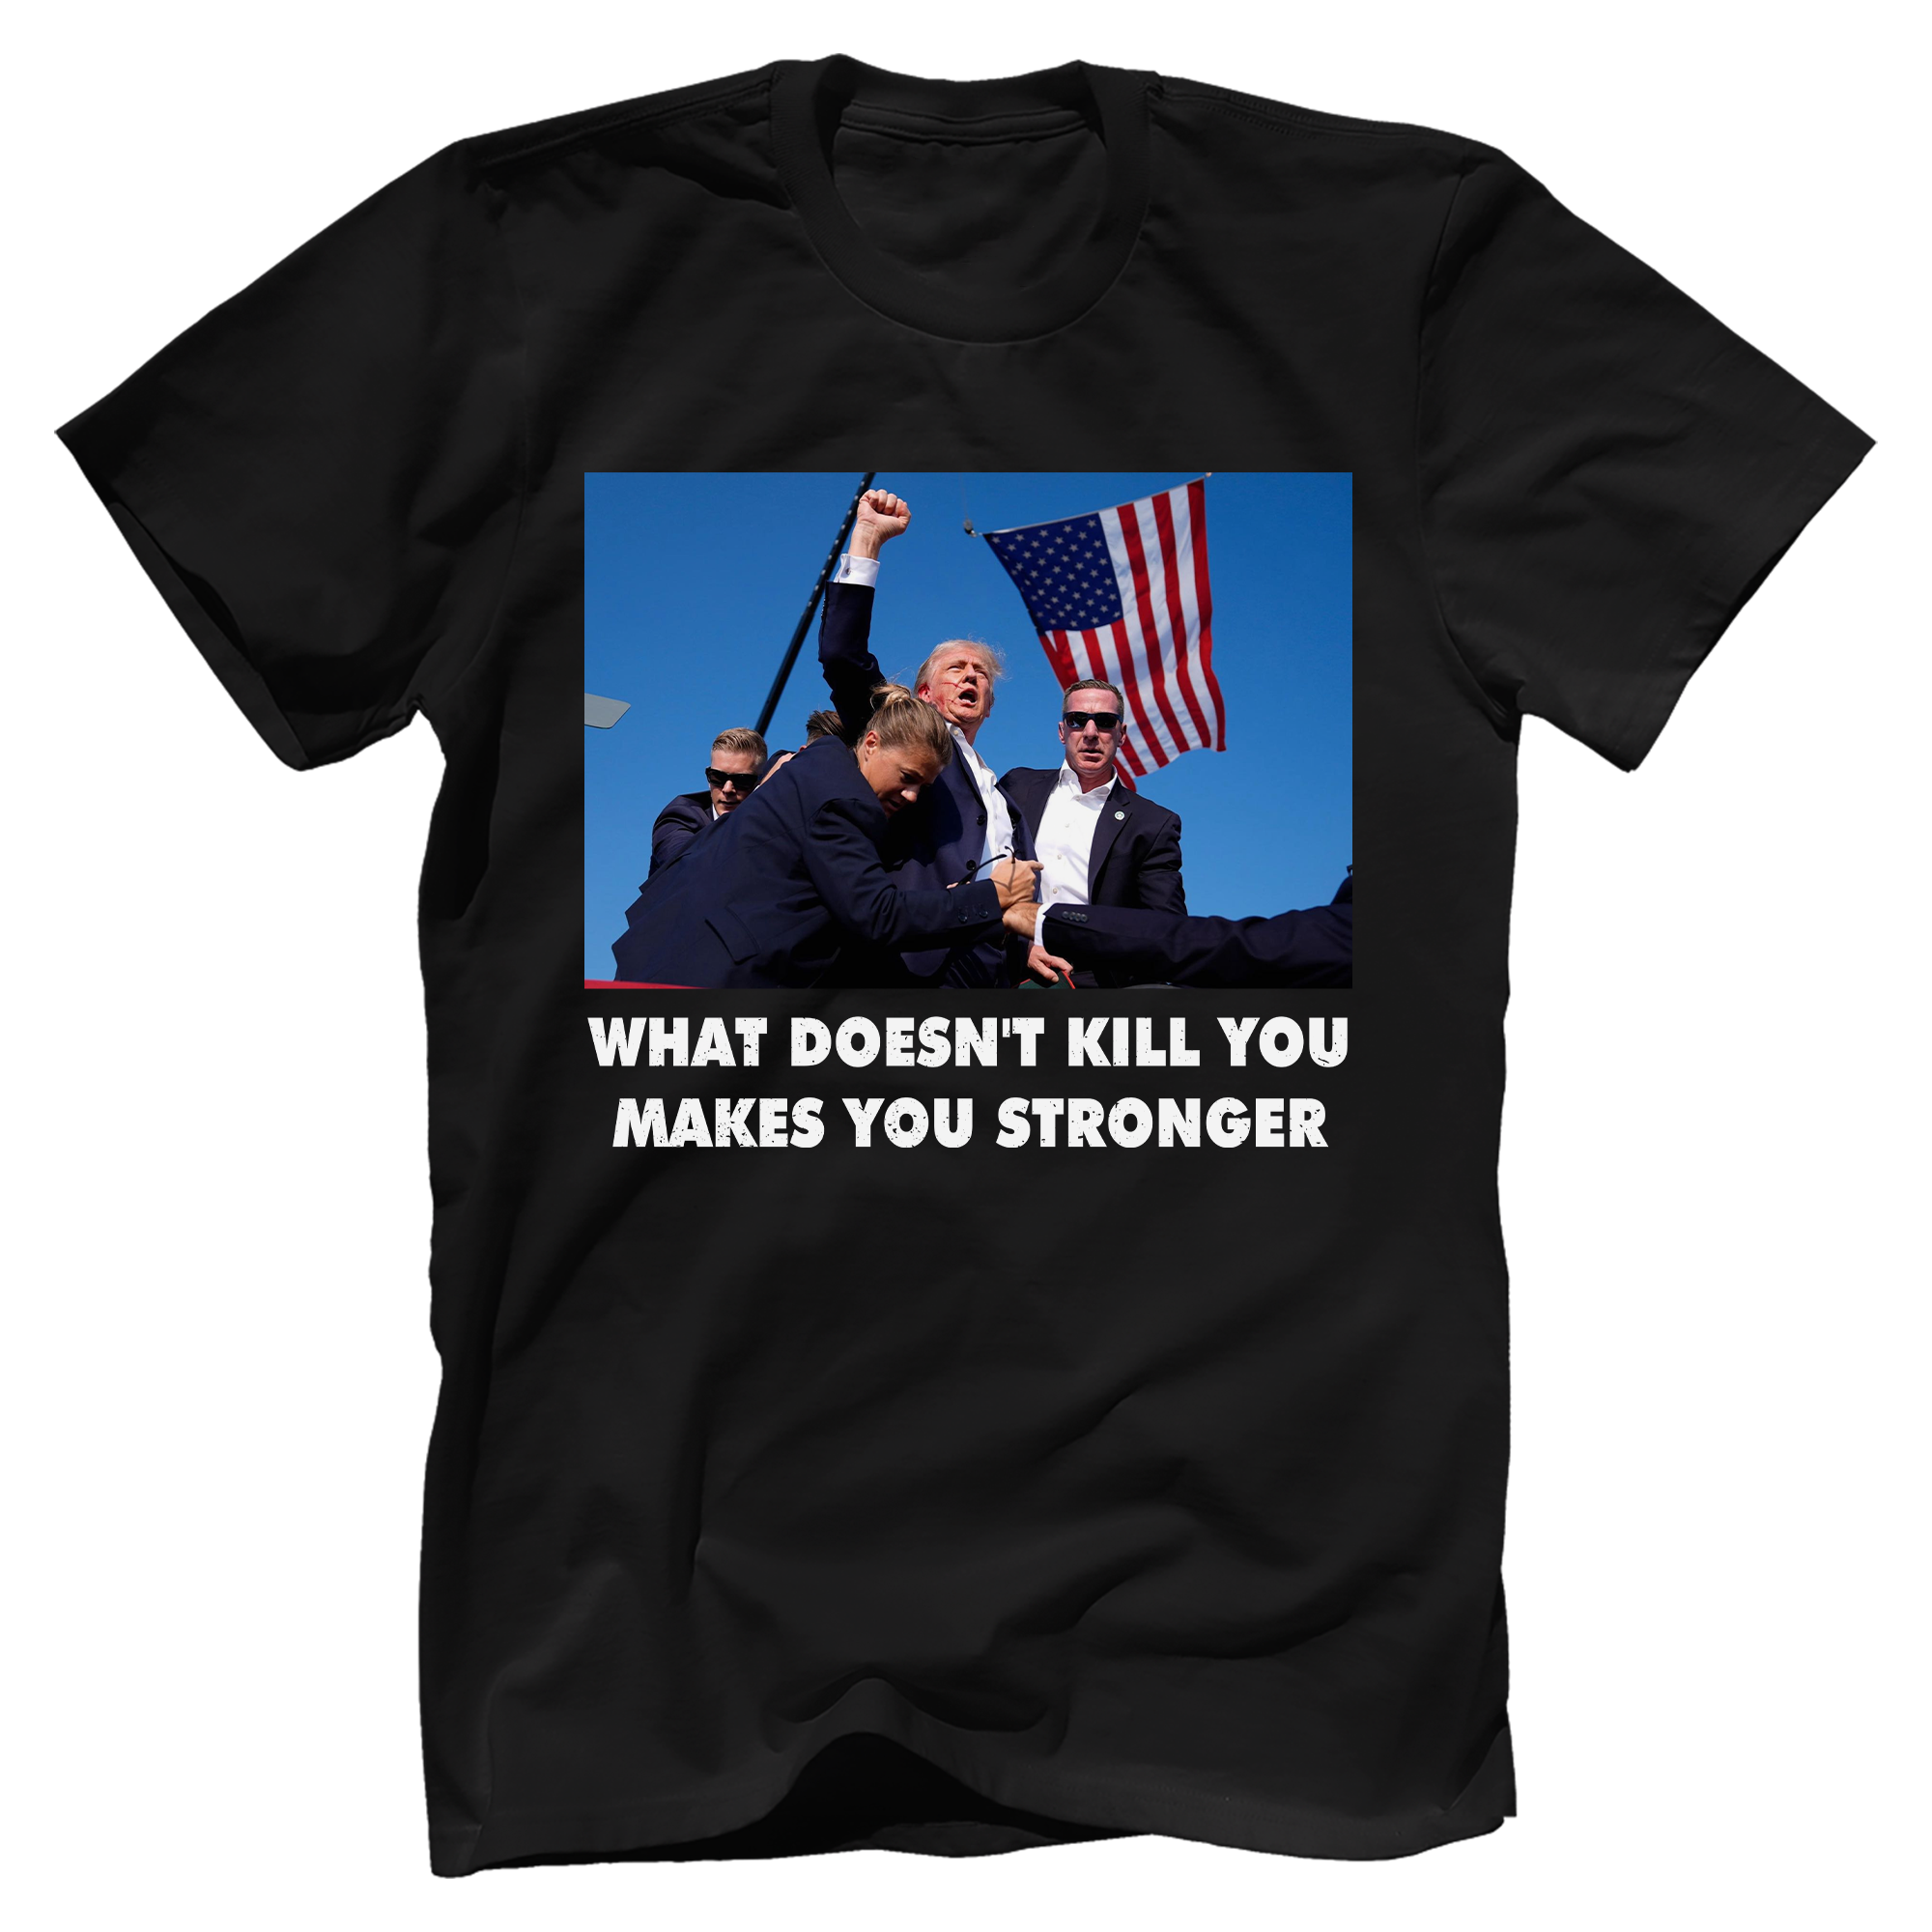 What Doesn’t Kill You Makes You Stronger T-Shirt - GB93